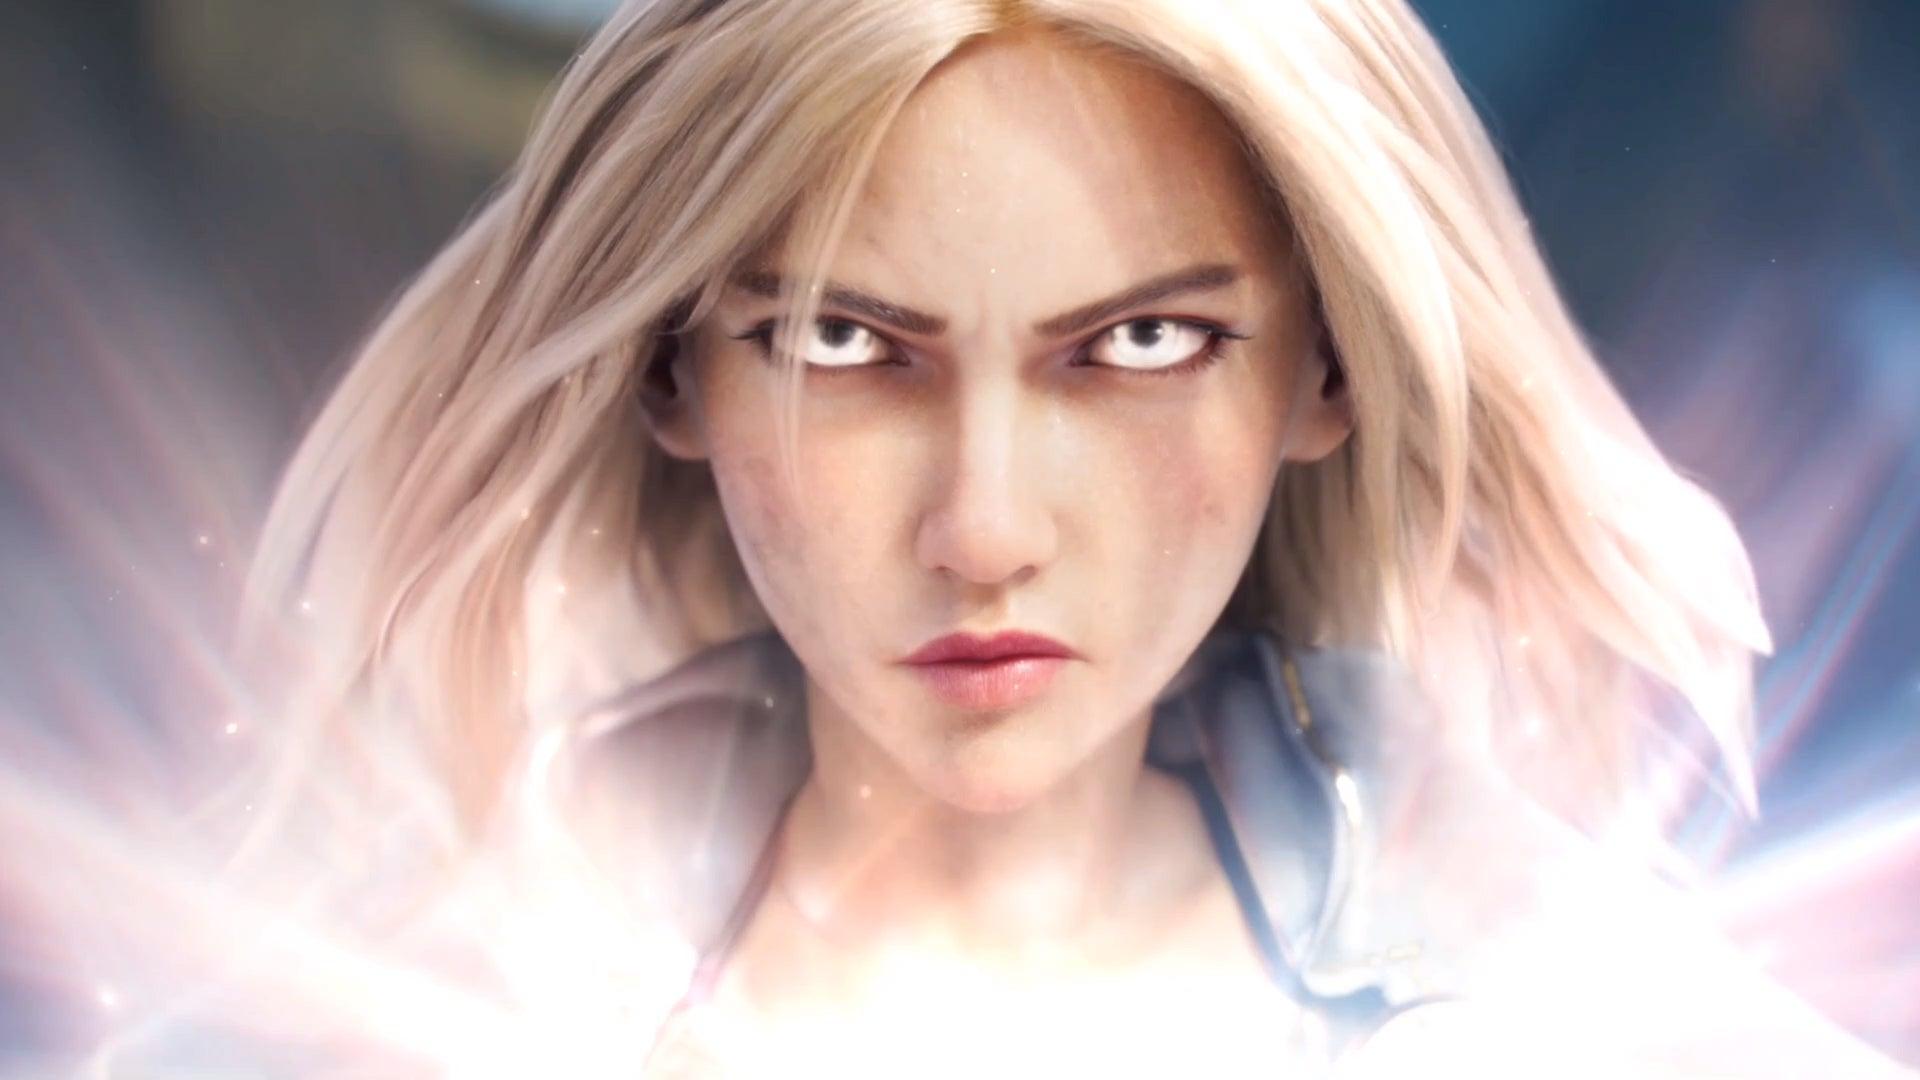 Wallpaper Engine Lux from the recent Season 2020 Cinematic